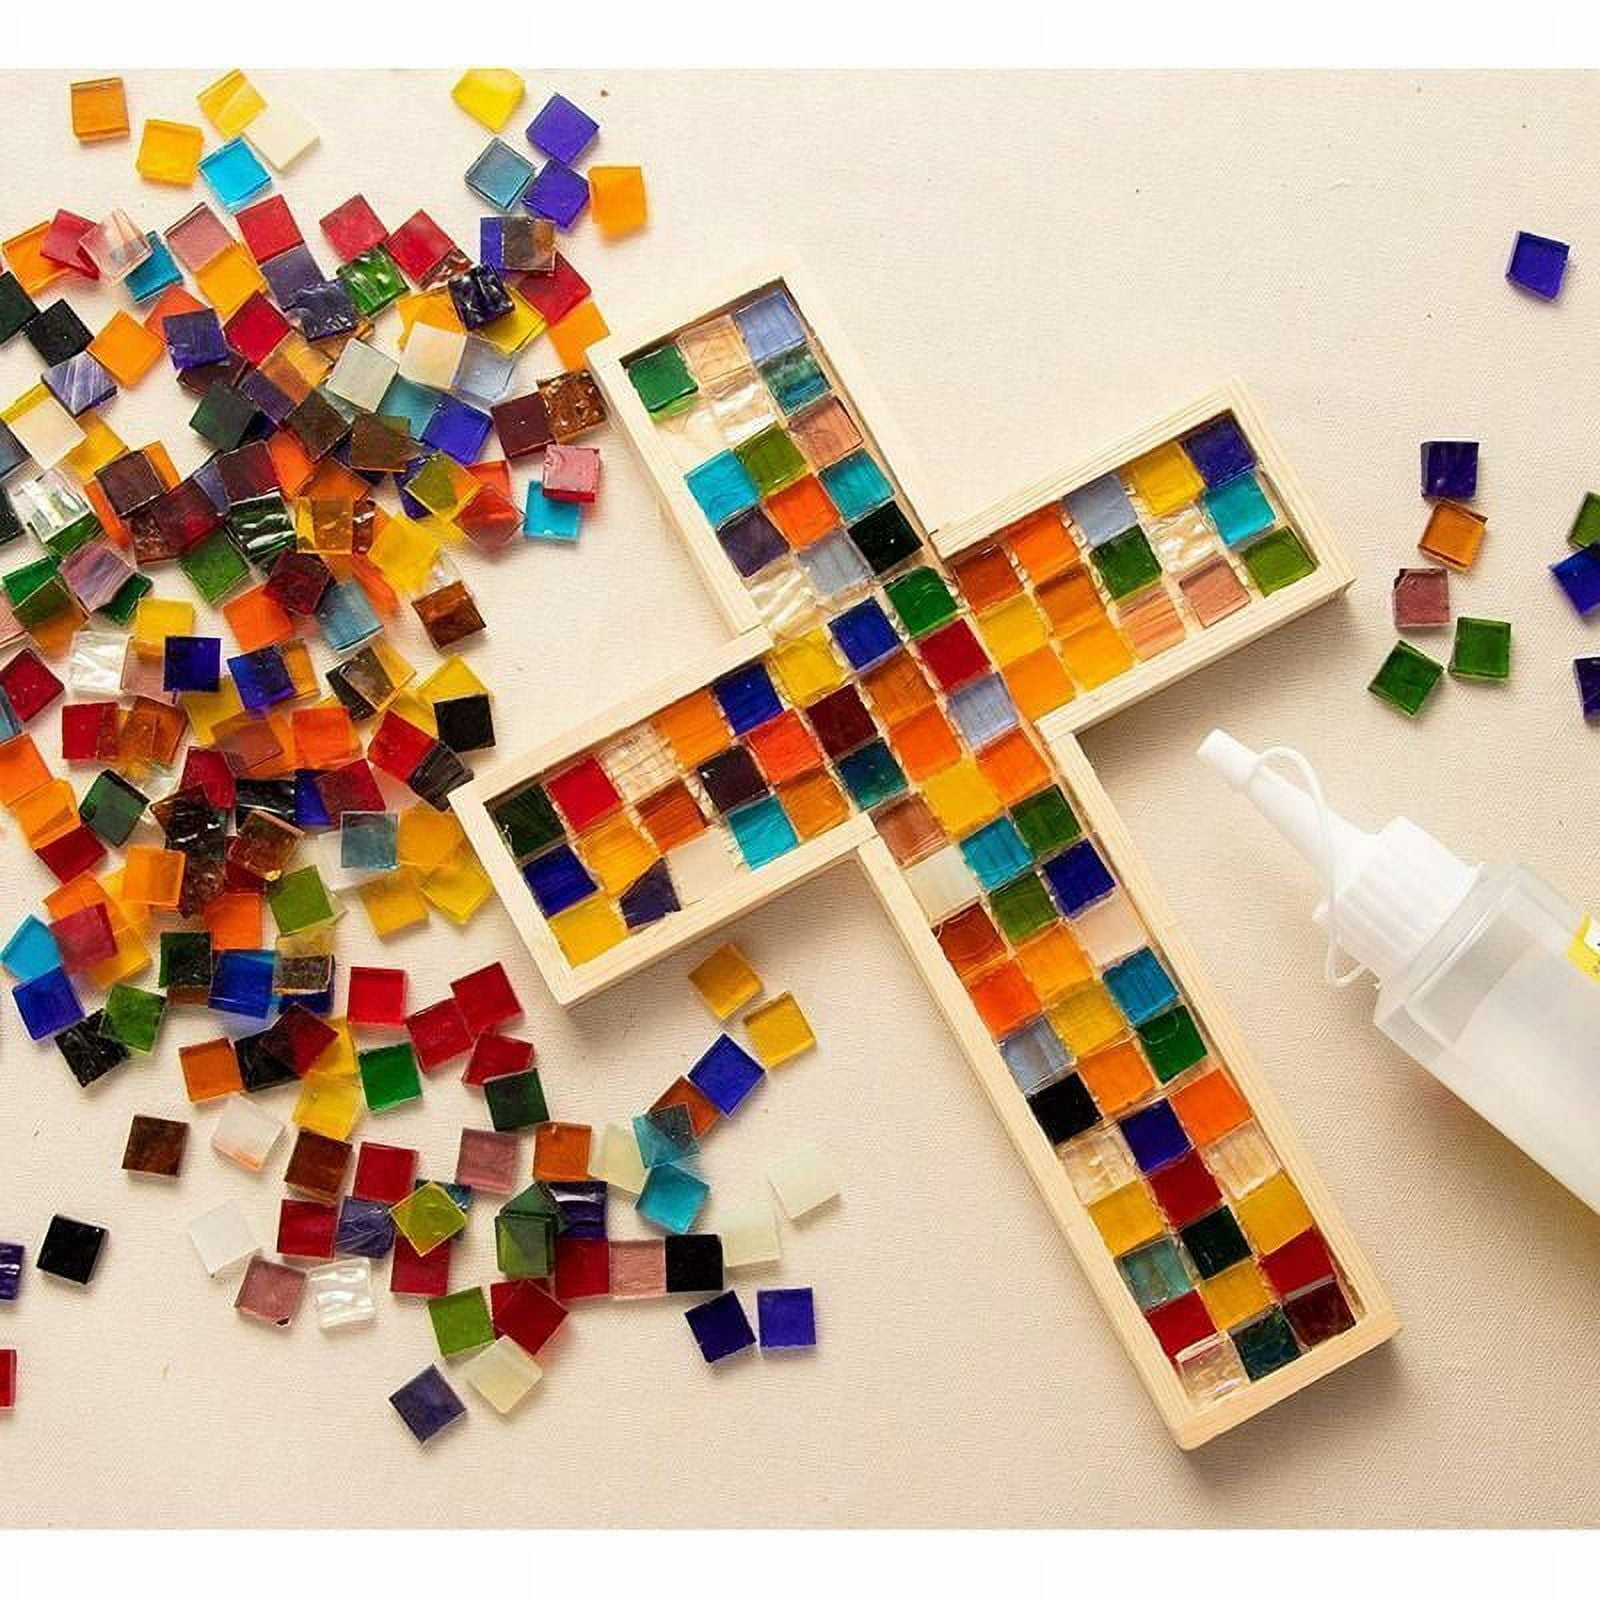 1000 Pieces Mixed Color Mosaic Tiles Mosaic Glass Pieces for Home Decoration or DIY Crafts Square (Square 1 by 1 cm)